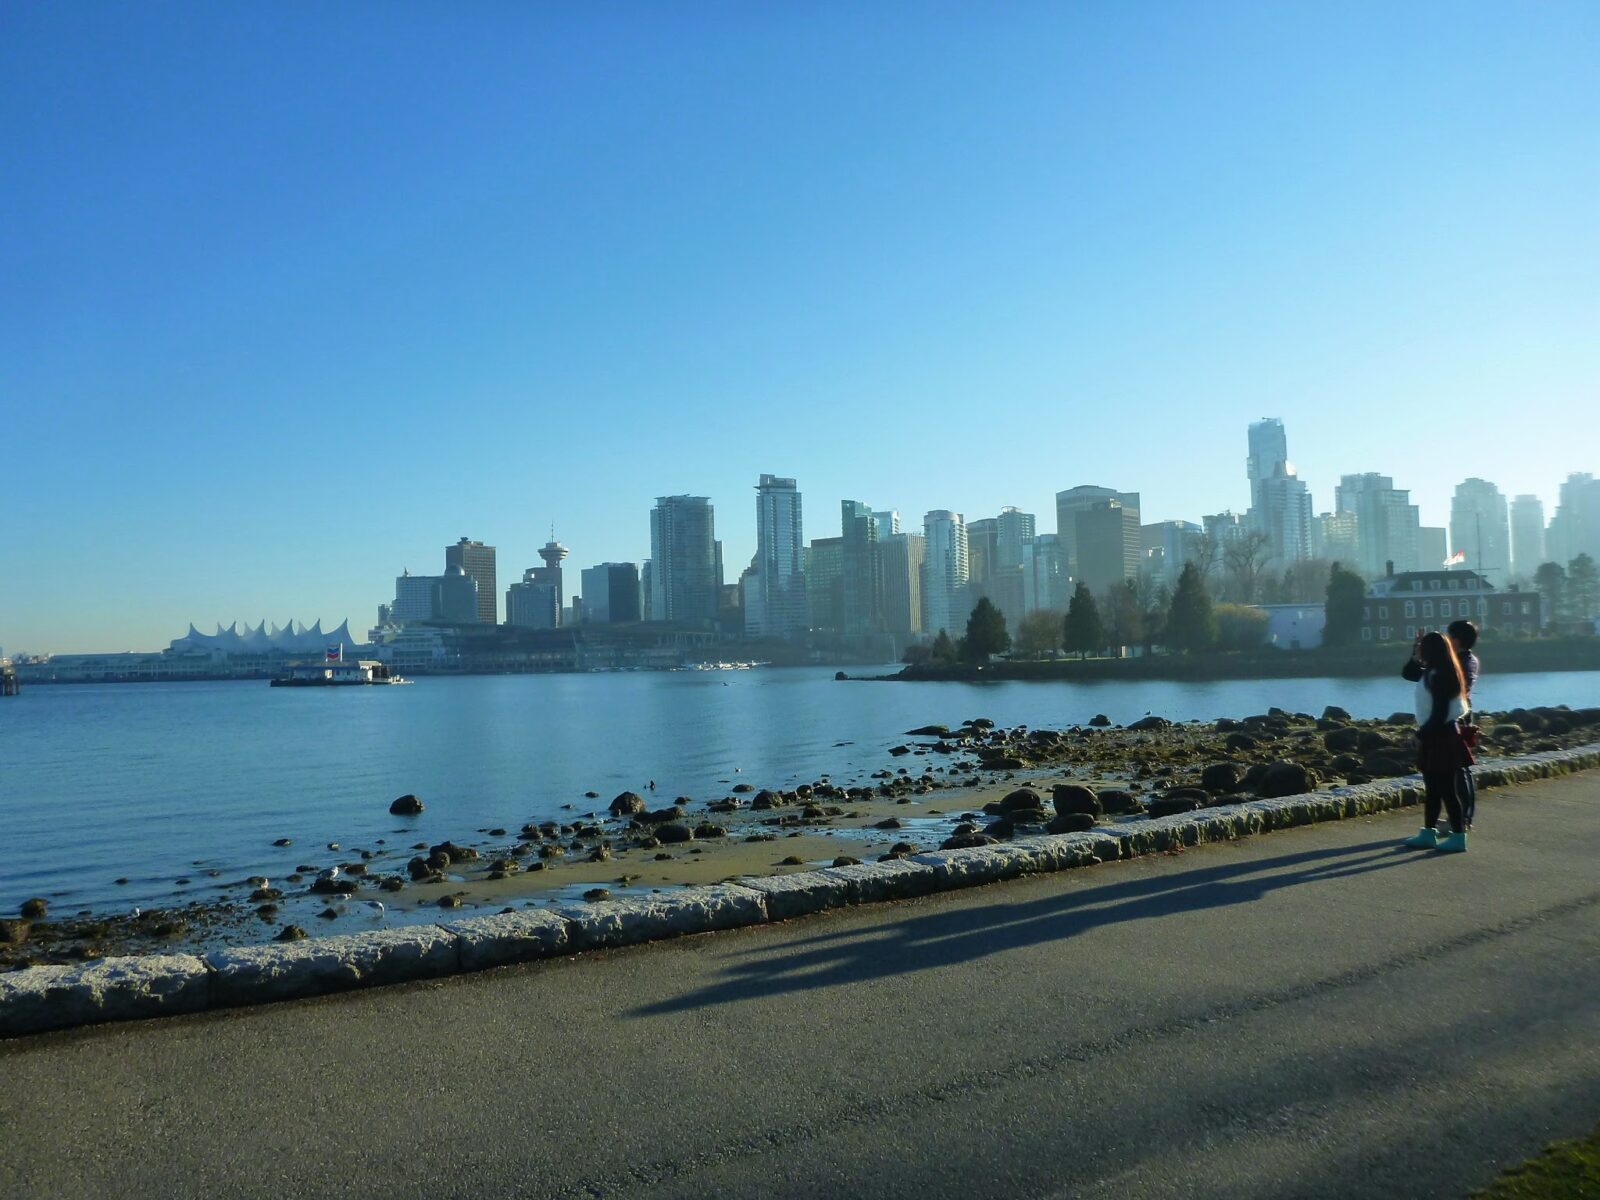 A city skyline is seen in the distance across a body of water. In the foreground is a paved trail and a rocky beach. It's a blue sky sunny day on the Stanley Park Seawall in Vancouver, Canada one of the best weekend getaways from seattle